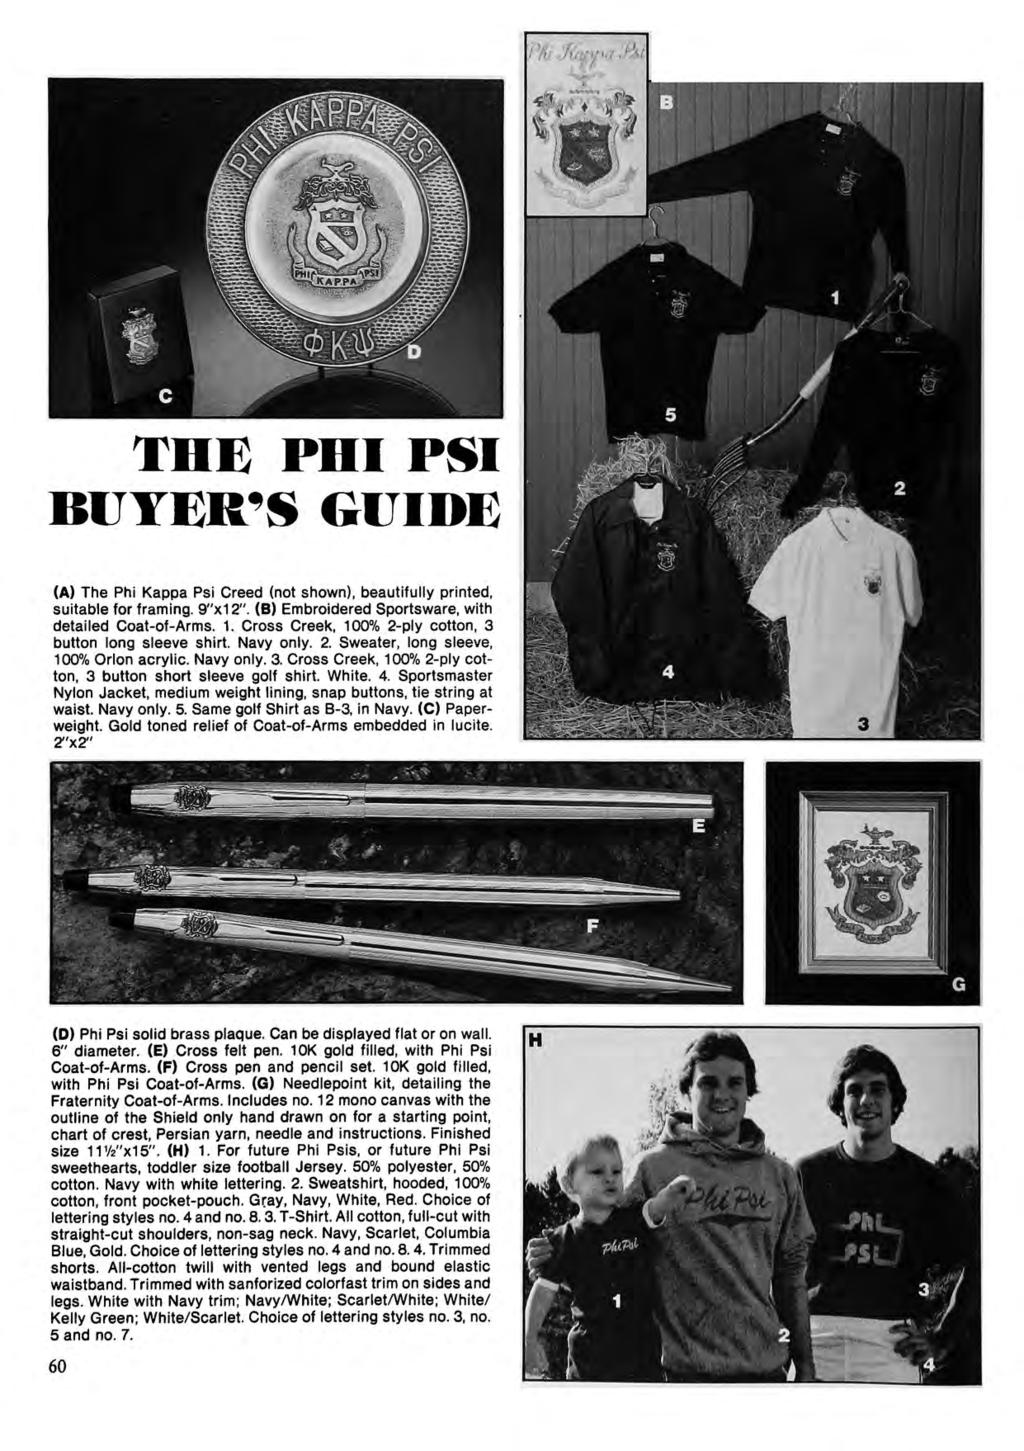 THE PHI PSI BUYER'S GUIDE (A) The Phi Kappa Psi Creed (not shown), beautifully printed, suitable for framing. 9"x12". (B) Embroidered Sportsware, with detailed Coat-of-Arms. 1.